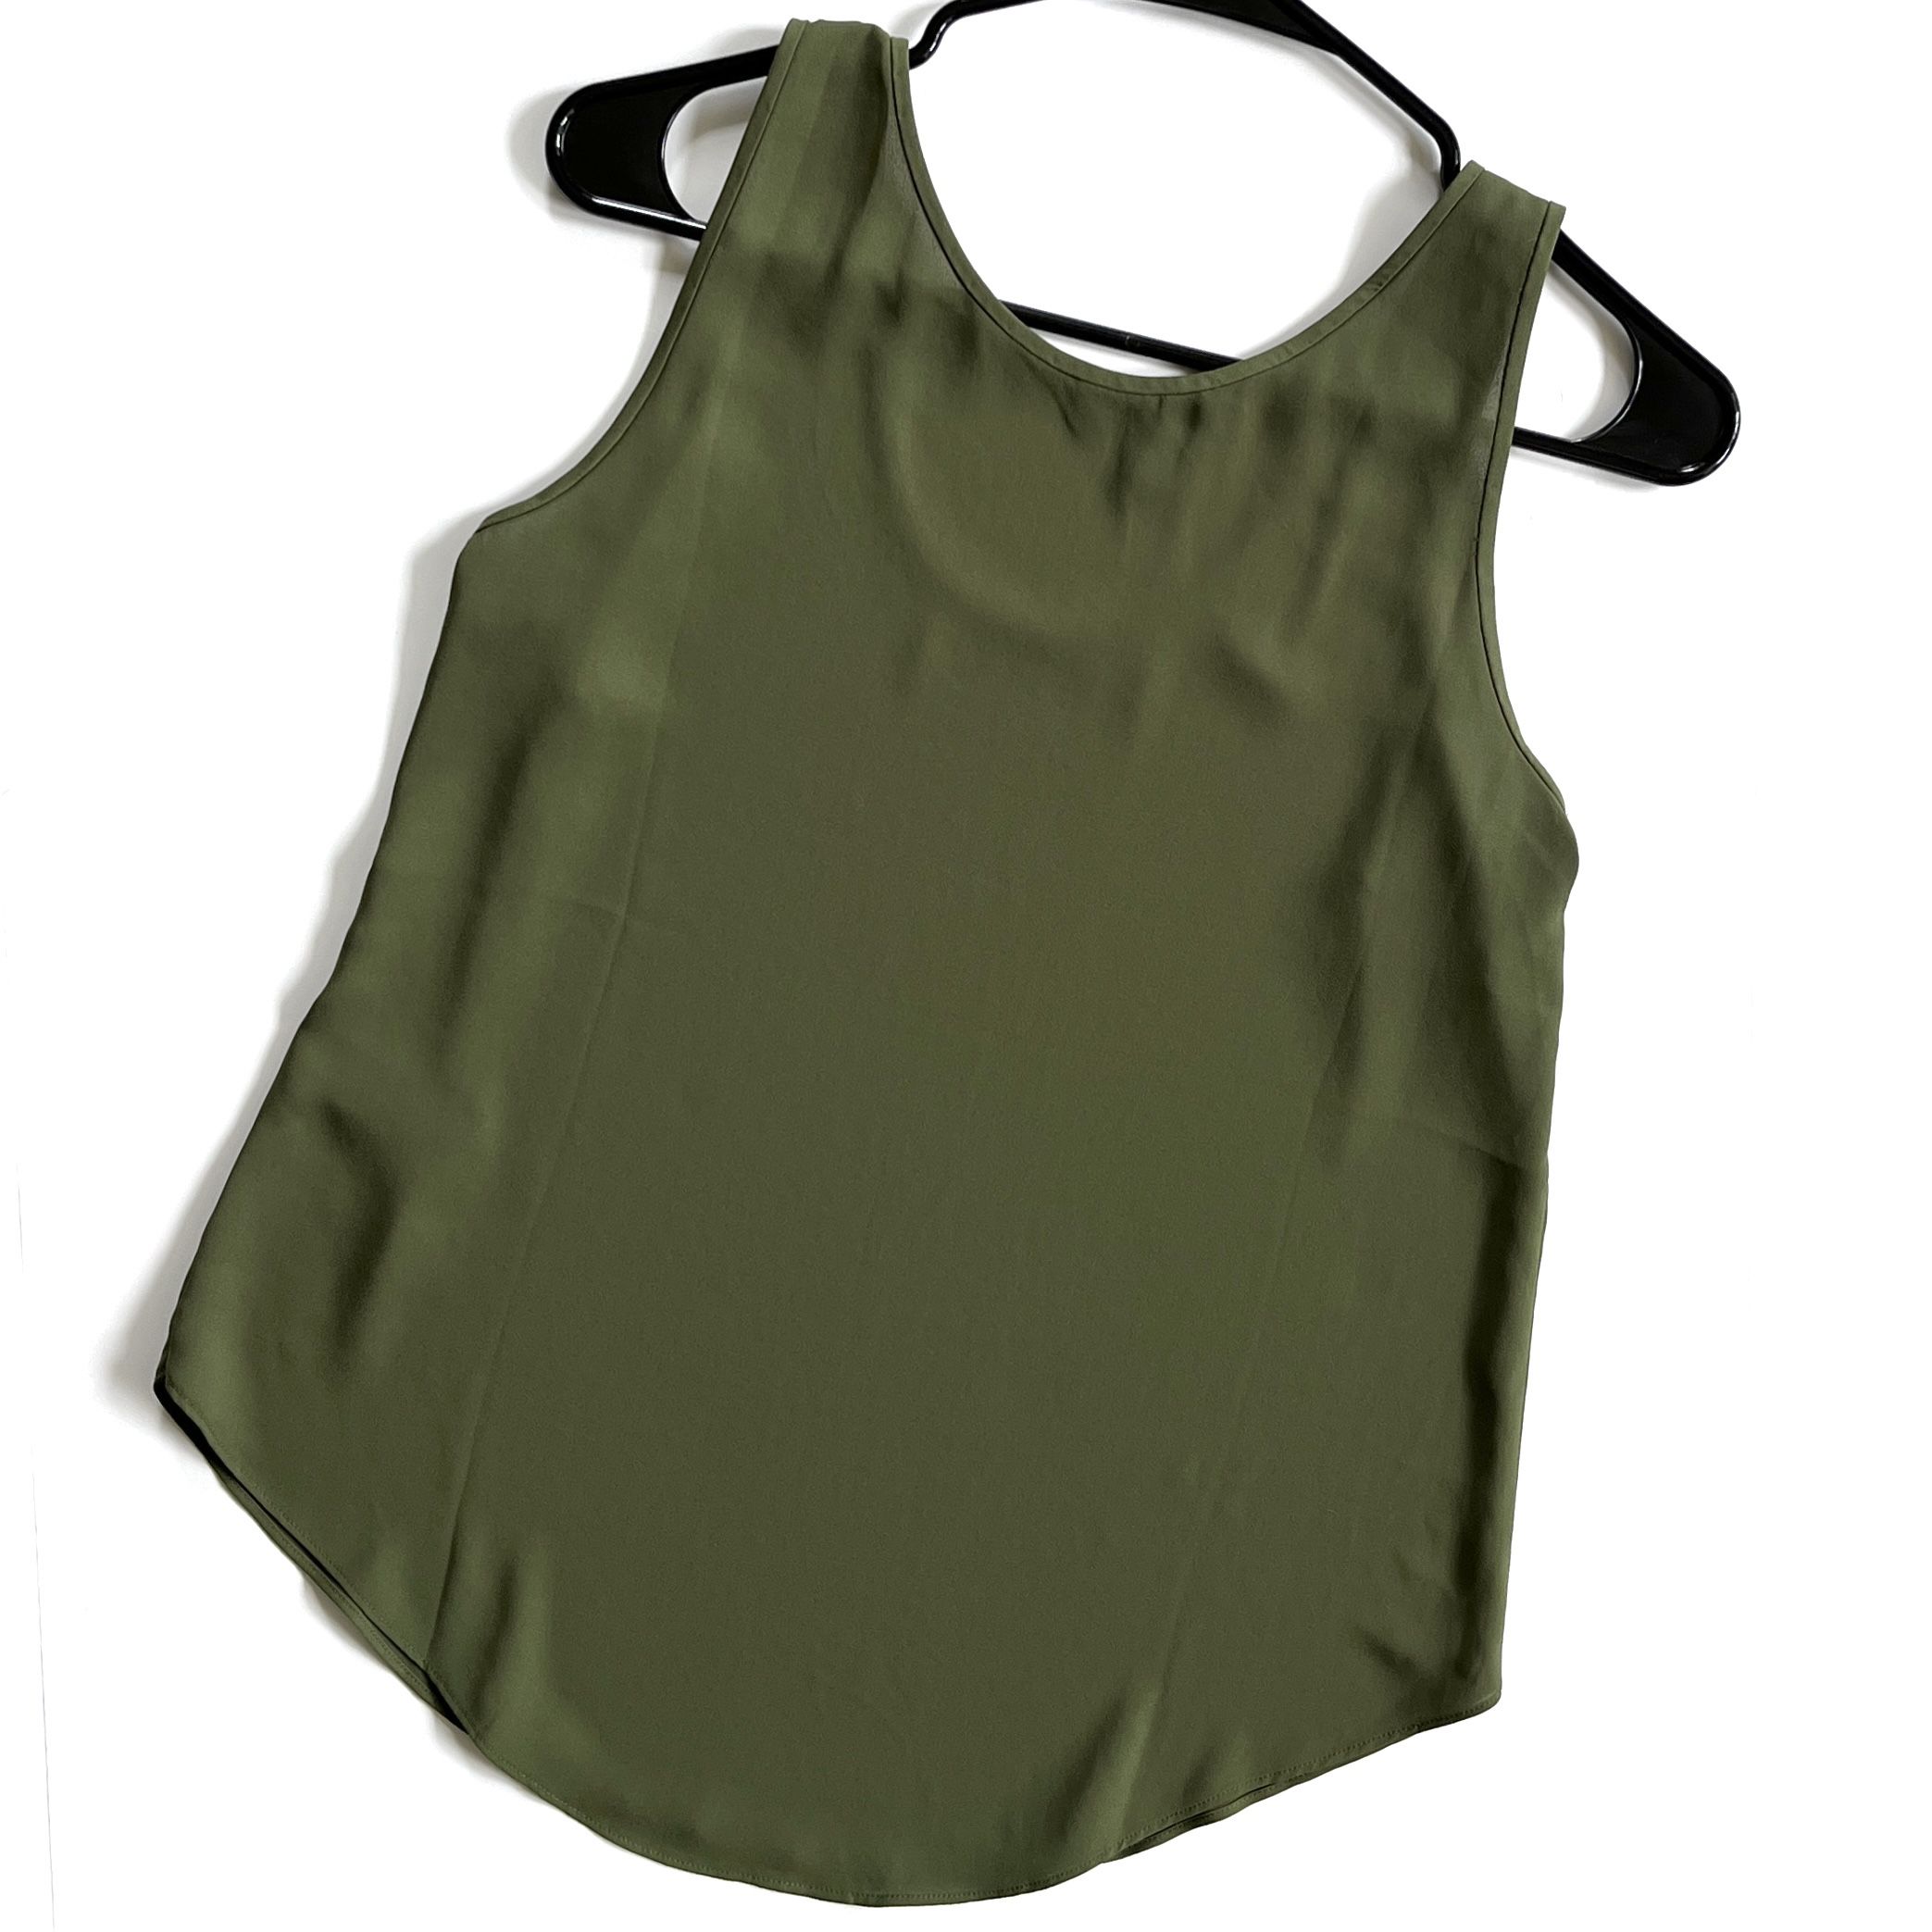 NWOT J.Crew Women’s Essential Classic Drapey Blouse Tank Top in Army Green (2)